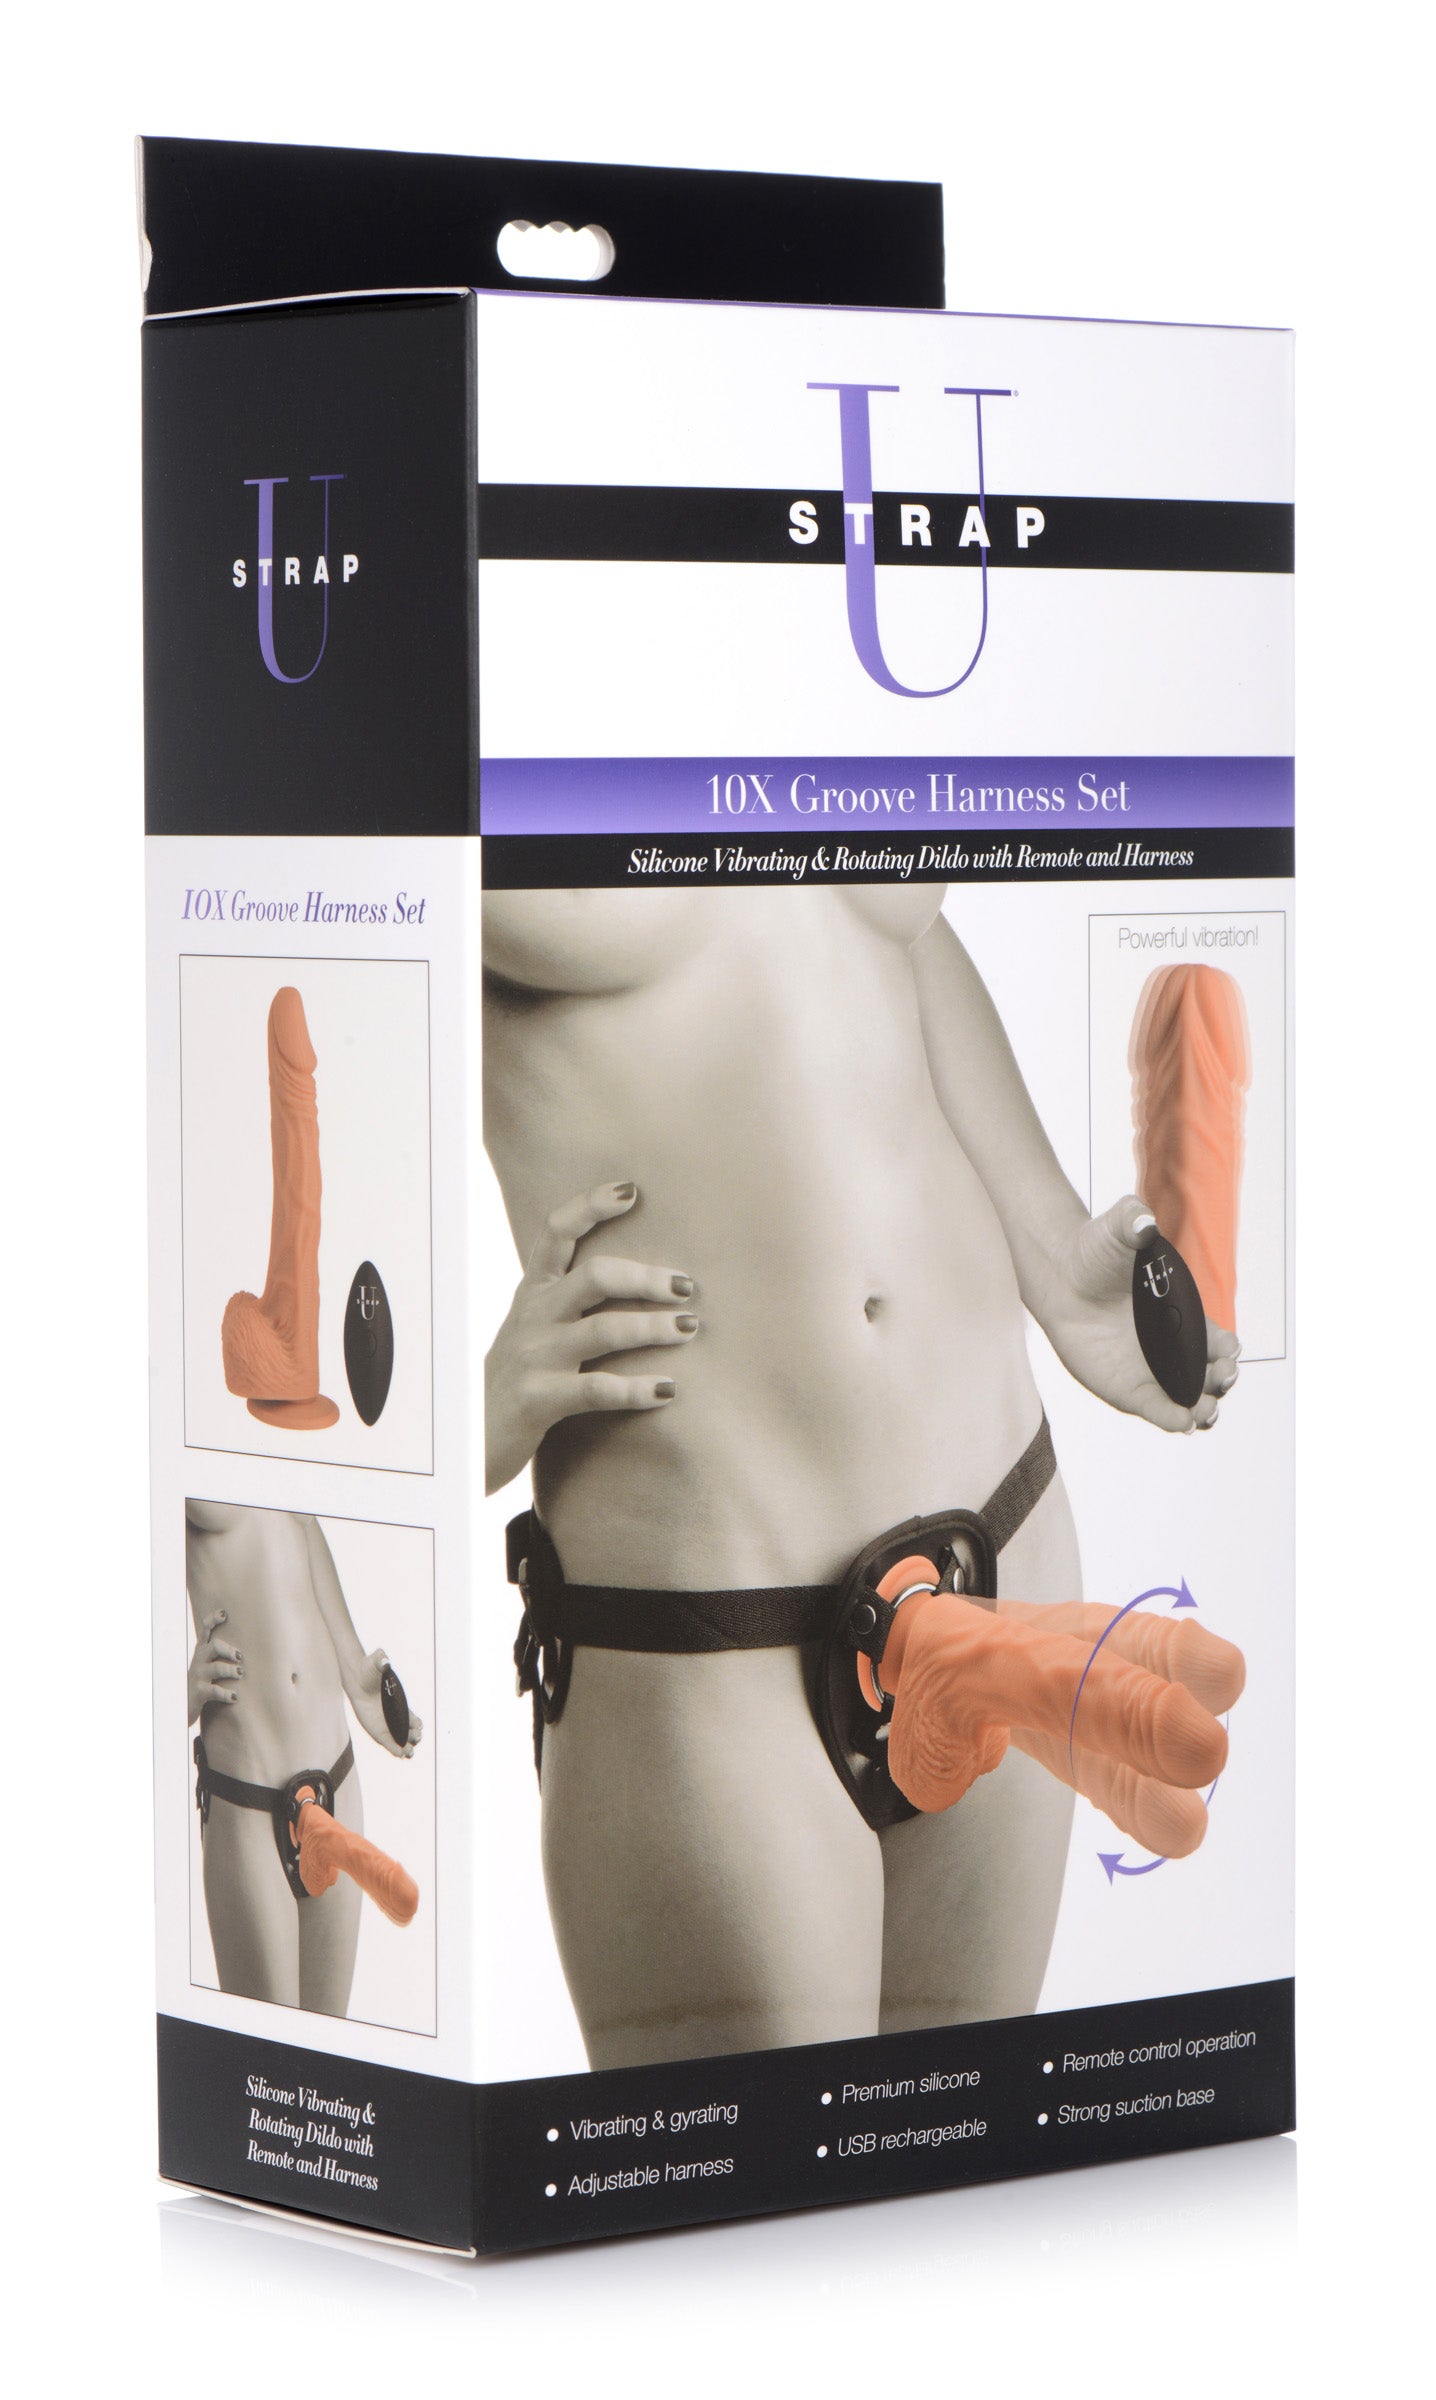 10X Groove Harness with Vibrating and Rotating Silicone Dildo - UABDSM